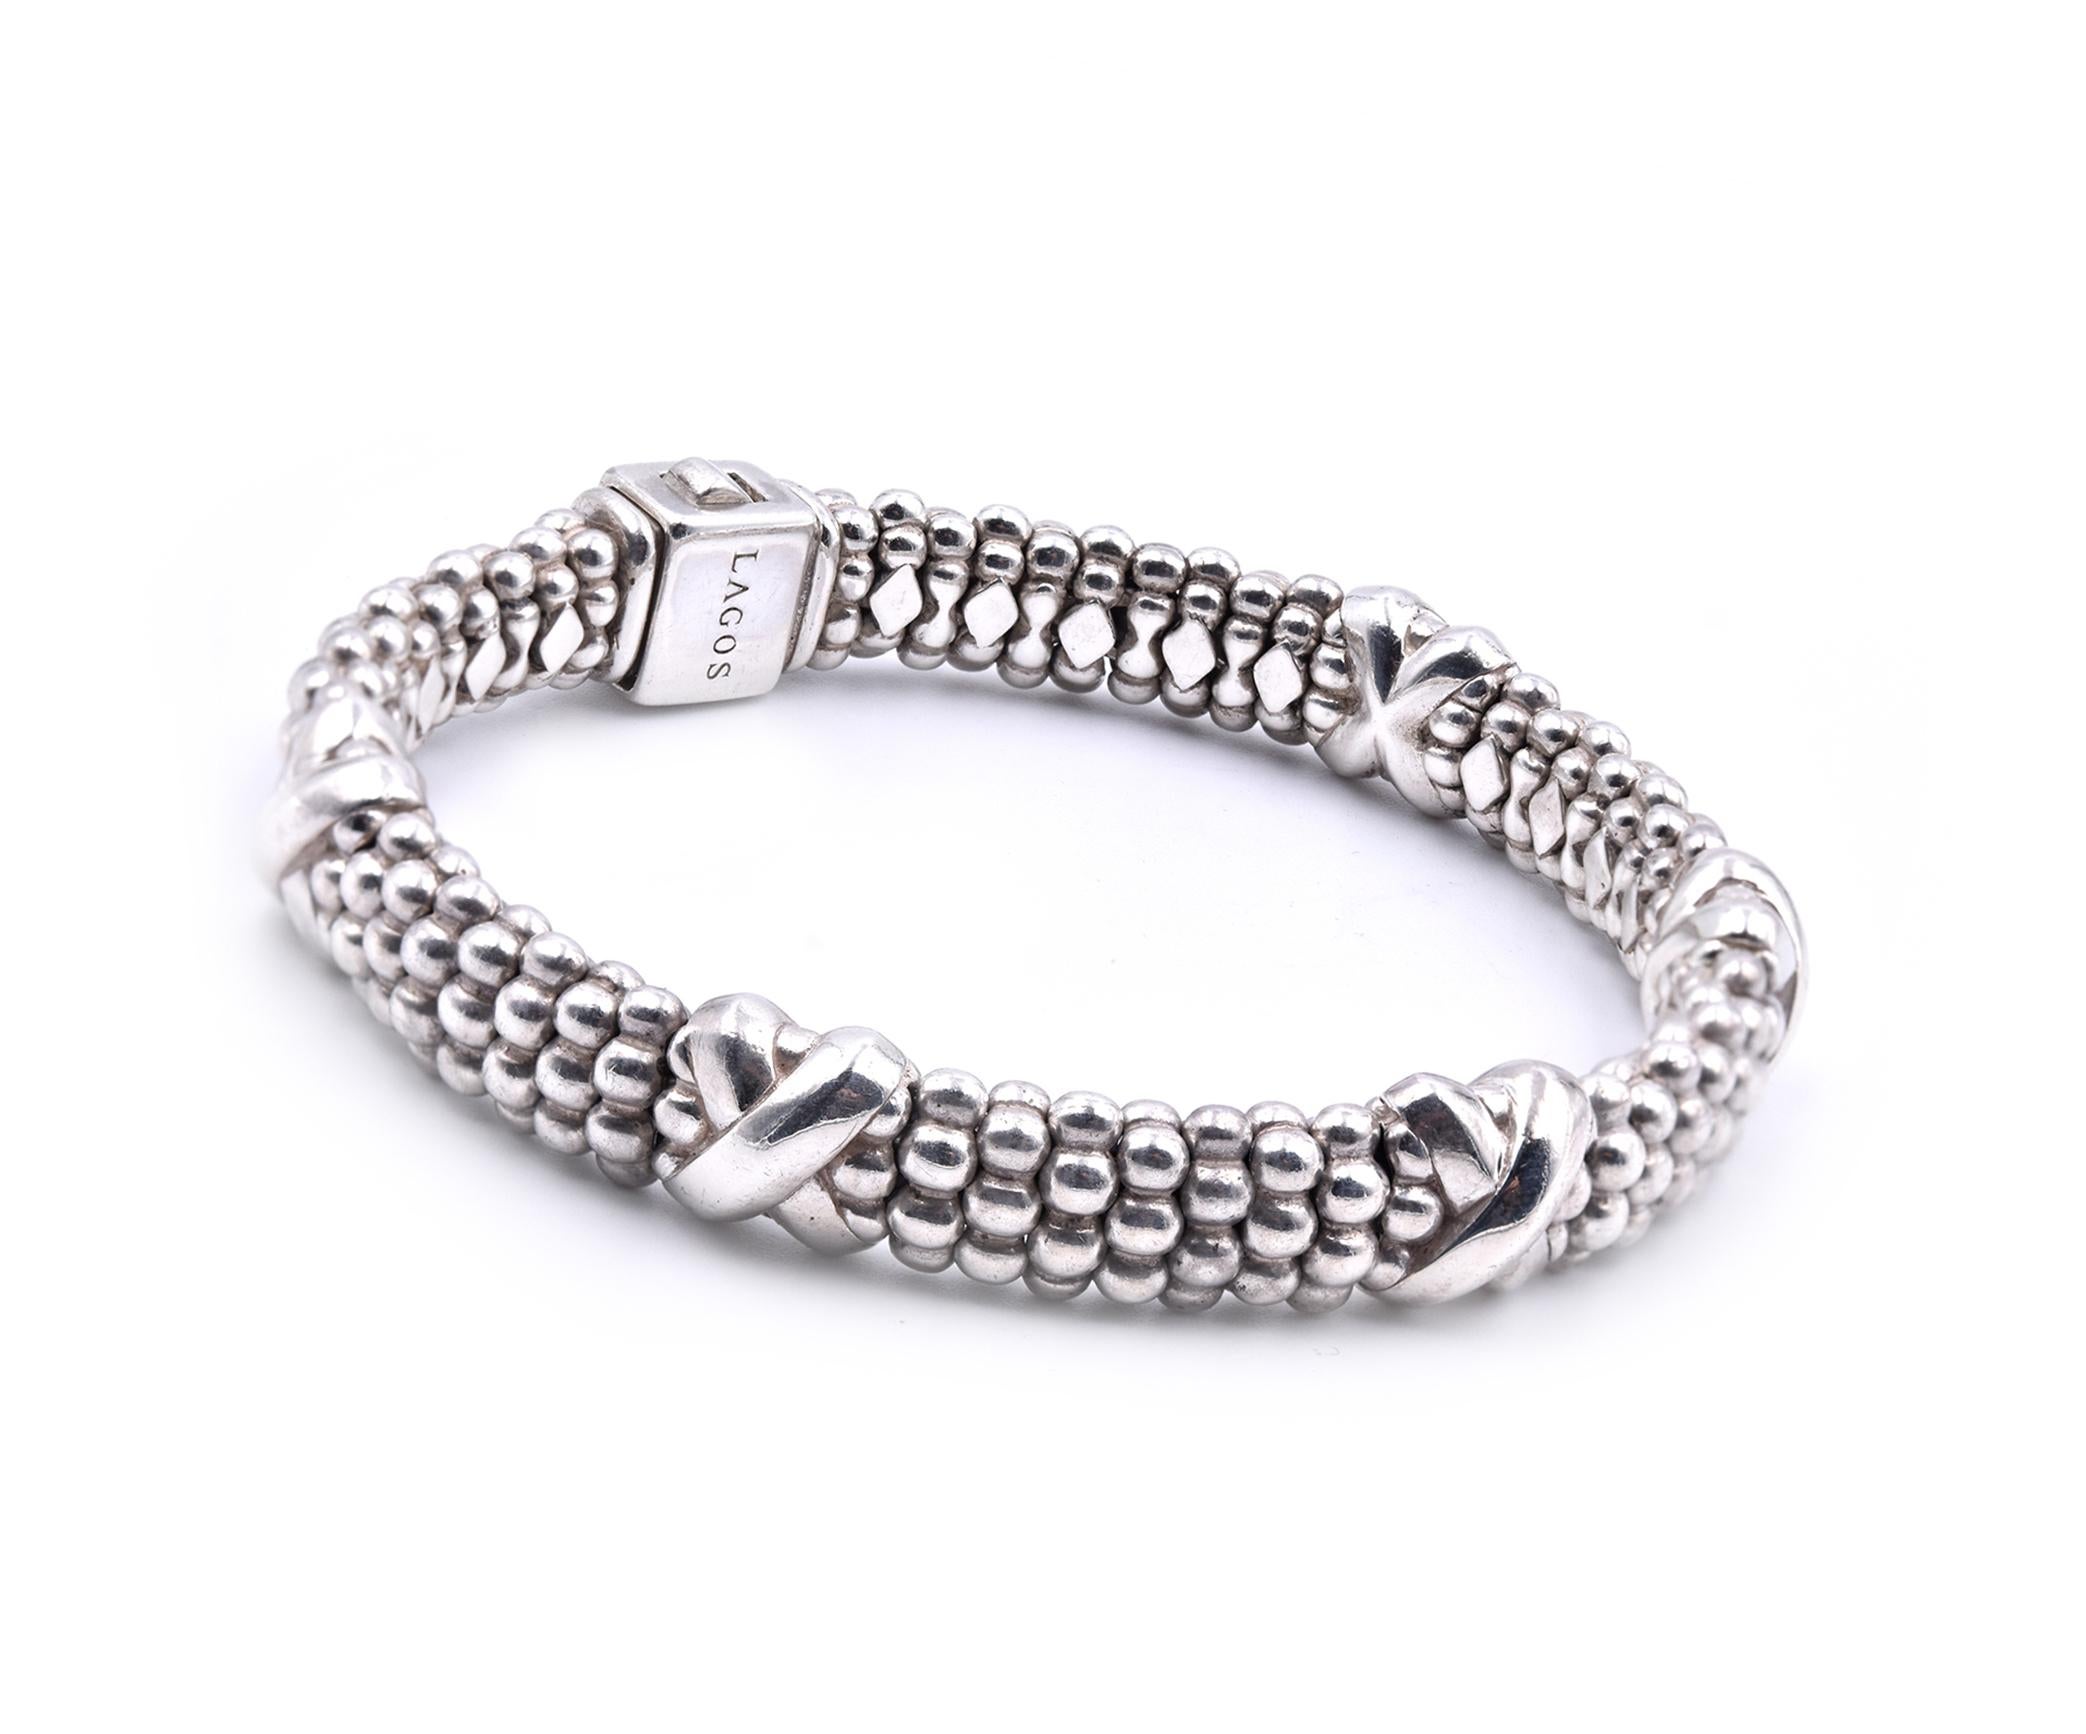 Designer: Lagos
Material: sterling silver 
Dimensions: bracelet measures 7-inches in length
Weight: 53.03 grams
